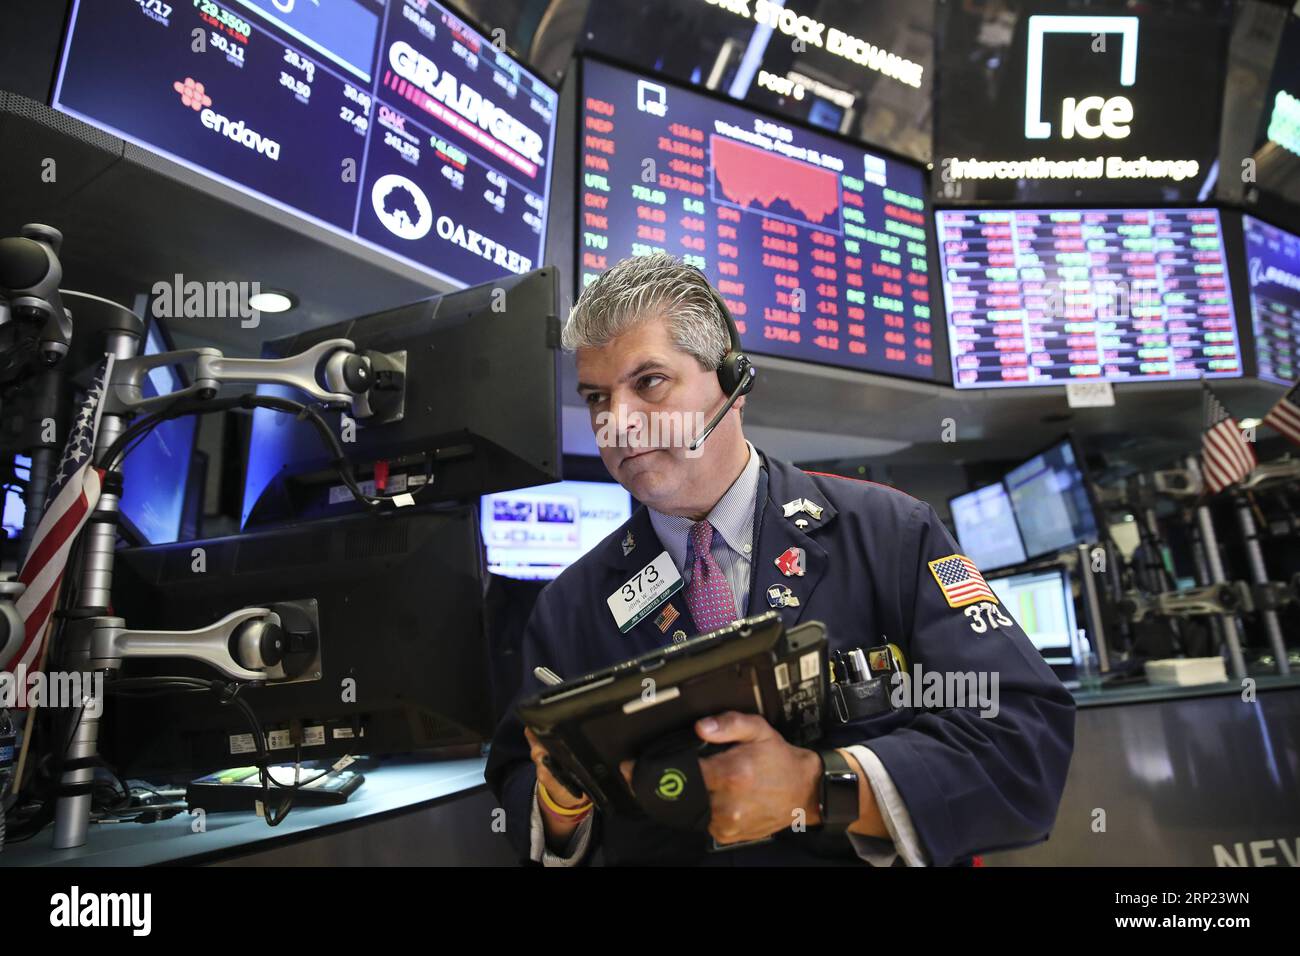 (180815) -- NEW YORK, Aug. 15, 2018 -- A trader works at the New York Stock Exchange in New York, the United States, on Aug. 15, 2018. U.S. stocks closed lower on Wednesday. The Dow Jones Industrial Average fell 137.51 points, or 0.54 percent, to 25,162.41. The S&P 500 was down 21.59 points, or 0.76 percent, to 2,818.37. The Nasdaq Composite Index dropped 96.78 points, or 1.23 percent, to 7,774.12. ) U.S.-NEW YORK-STOCKS WangxYing PUBLICATIONxNOTxINxCHN Stock Photo